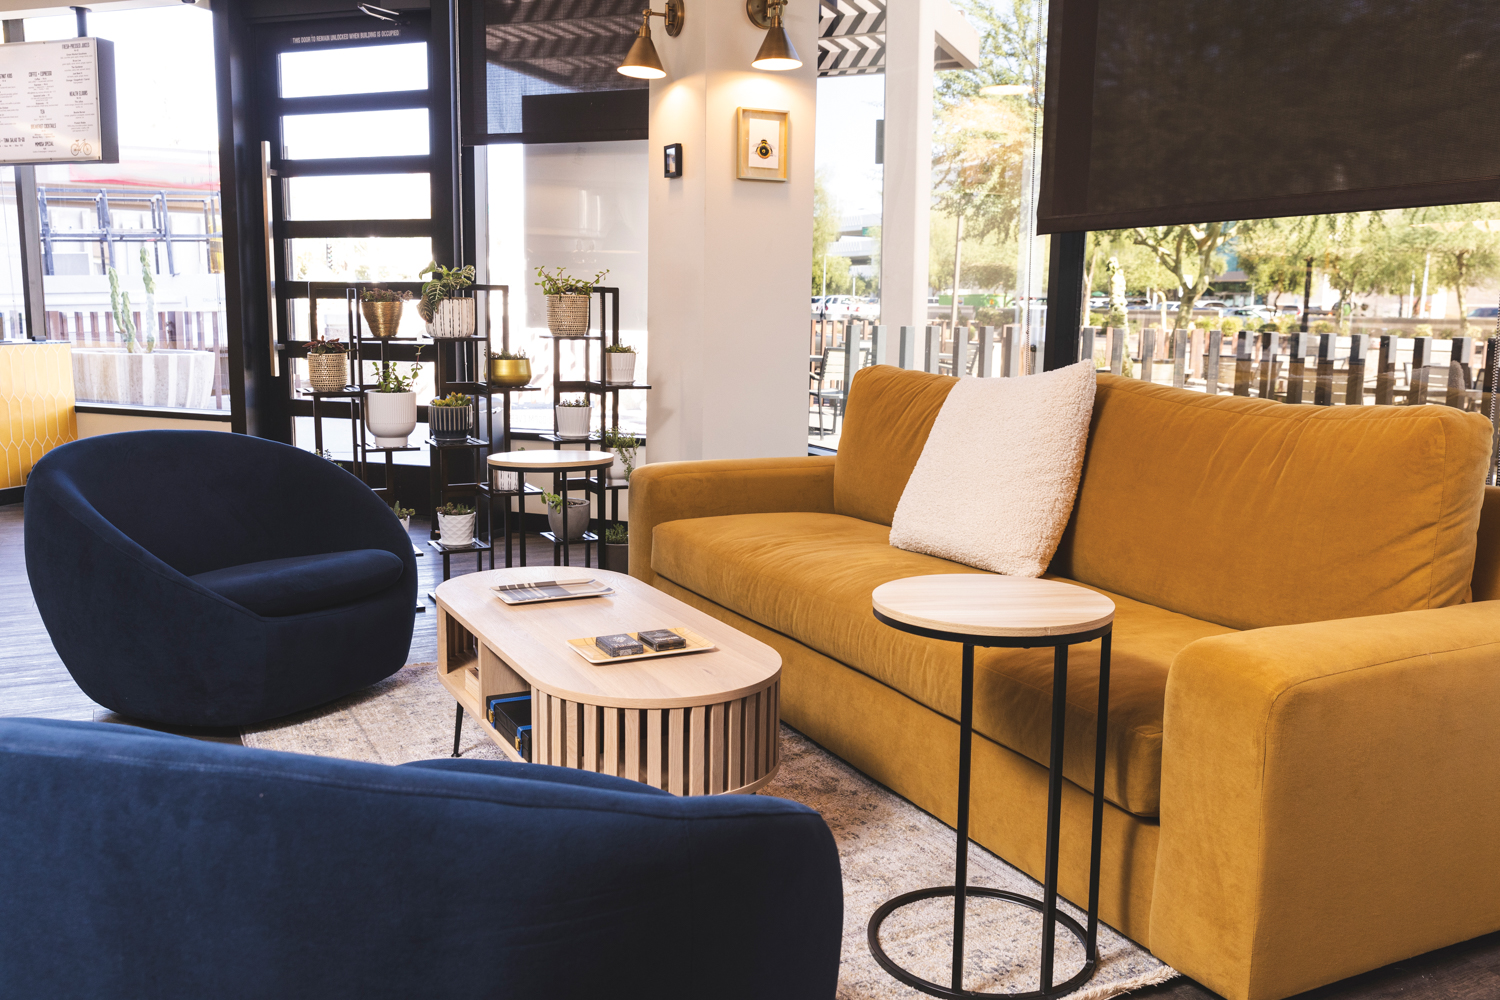 Restaurant seating area with mustard-colored sofa and navy arm chairs around a coffee table.